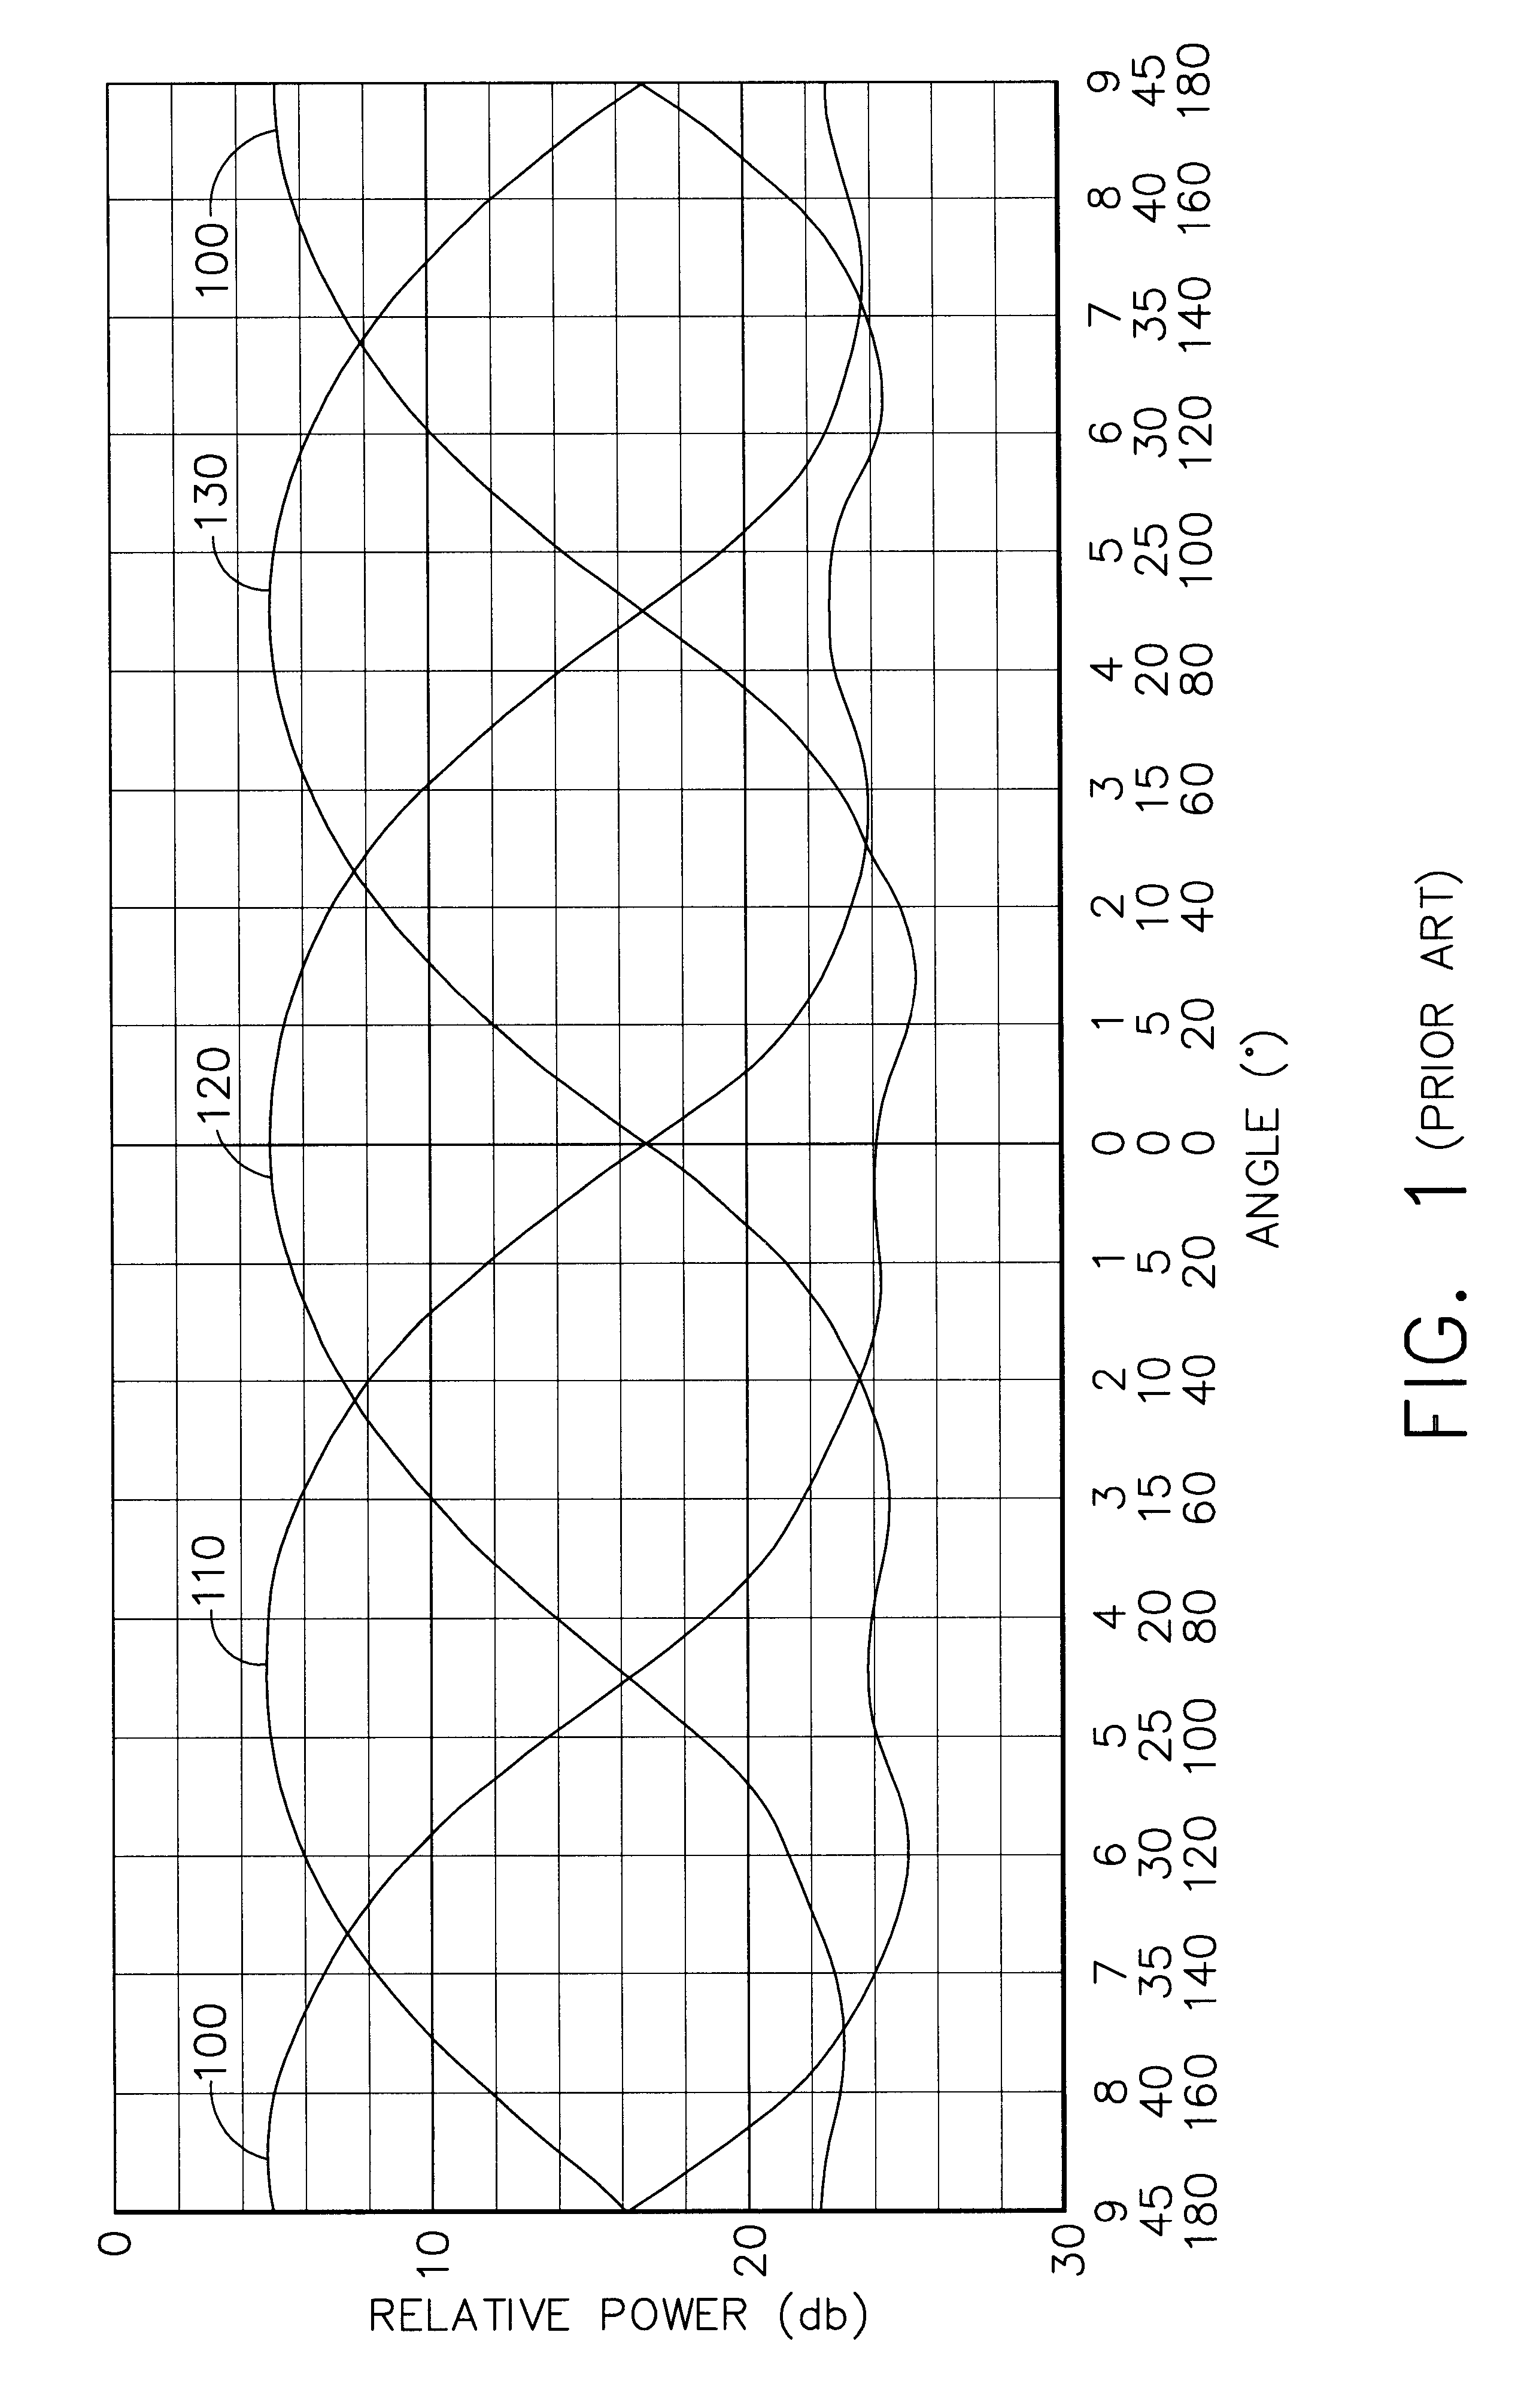 System for processing directional signals